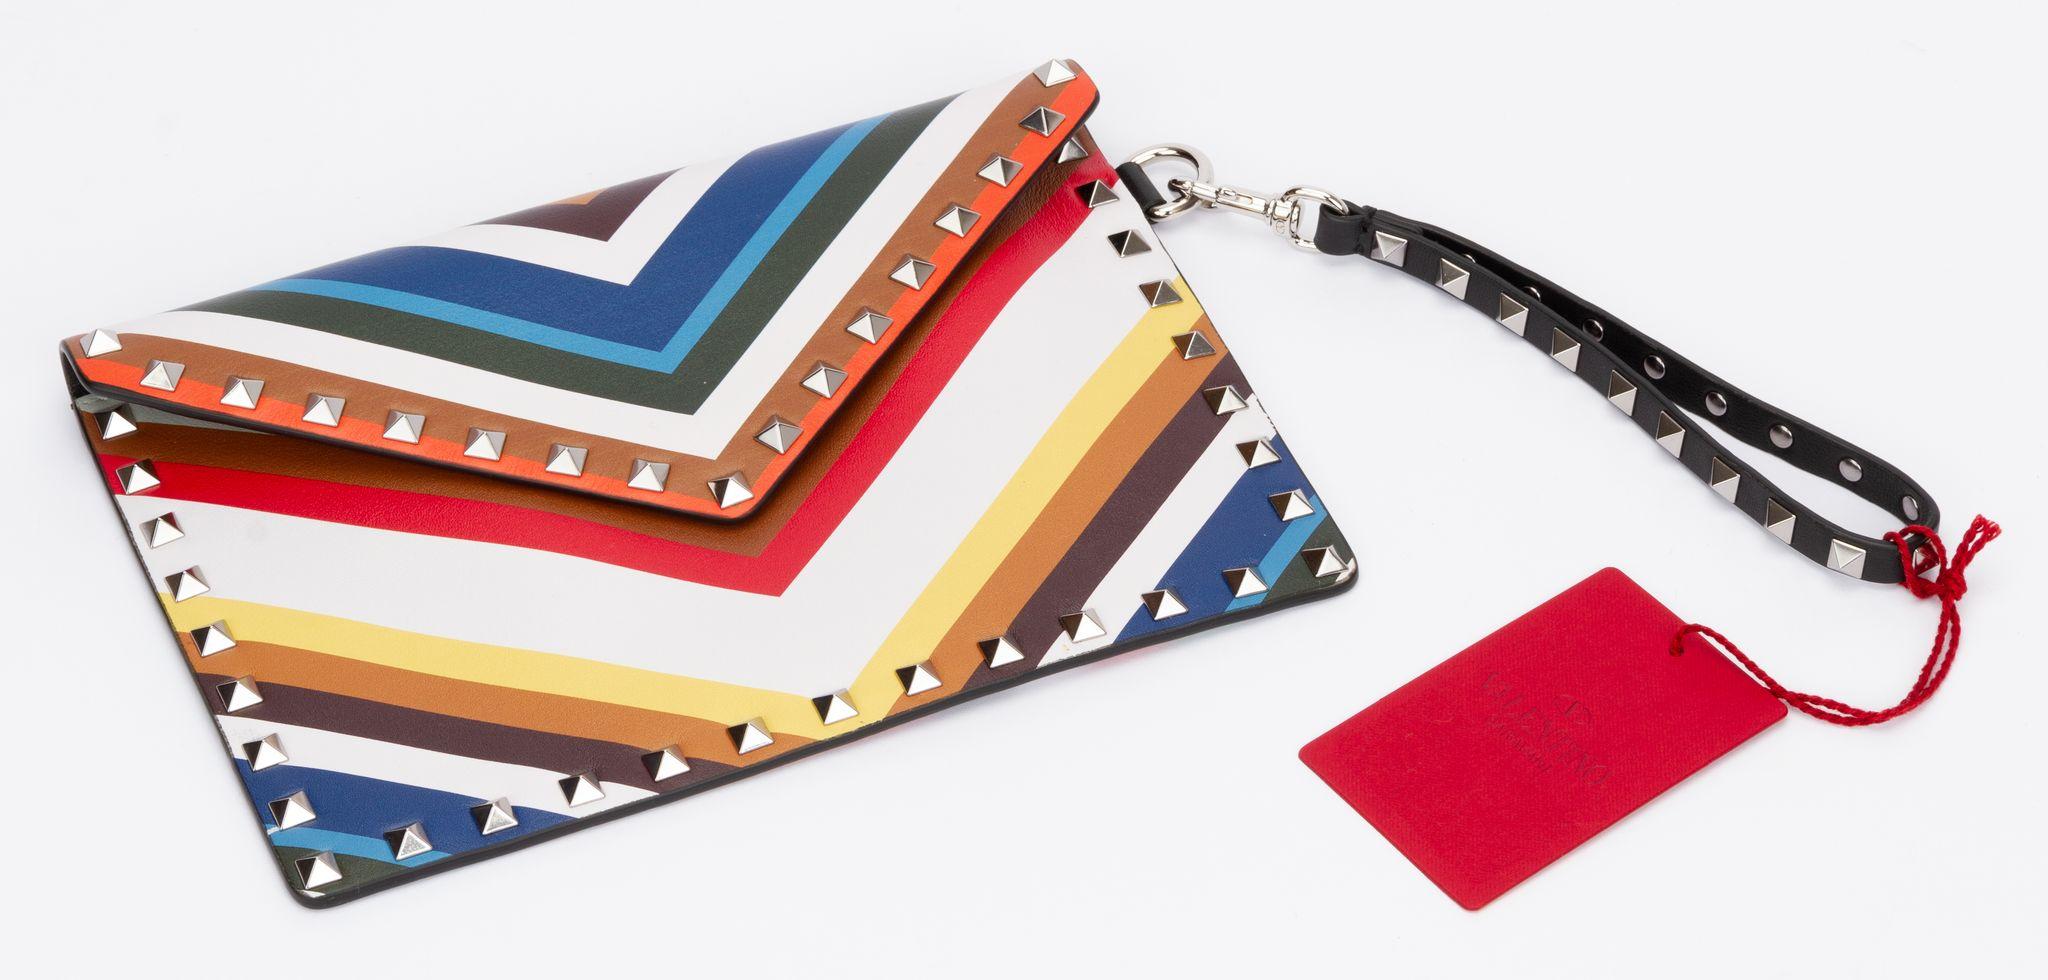 Valentino NIB striped rock stud clutch with detachable wristlet . Multicolor leather and silver tone hardware. Includes tag, original box and dust cover.